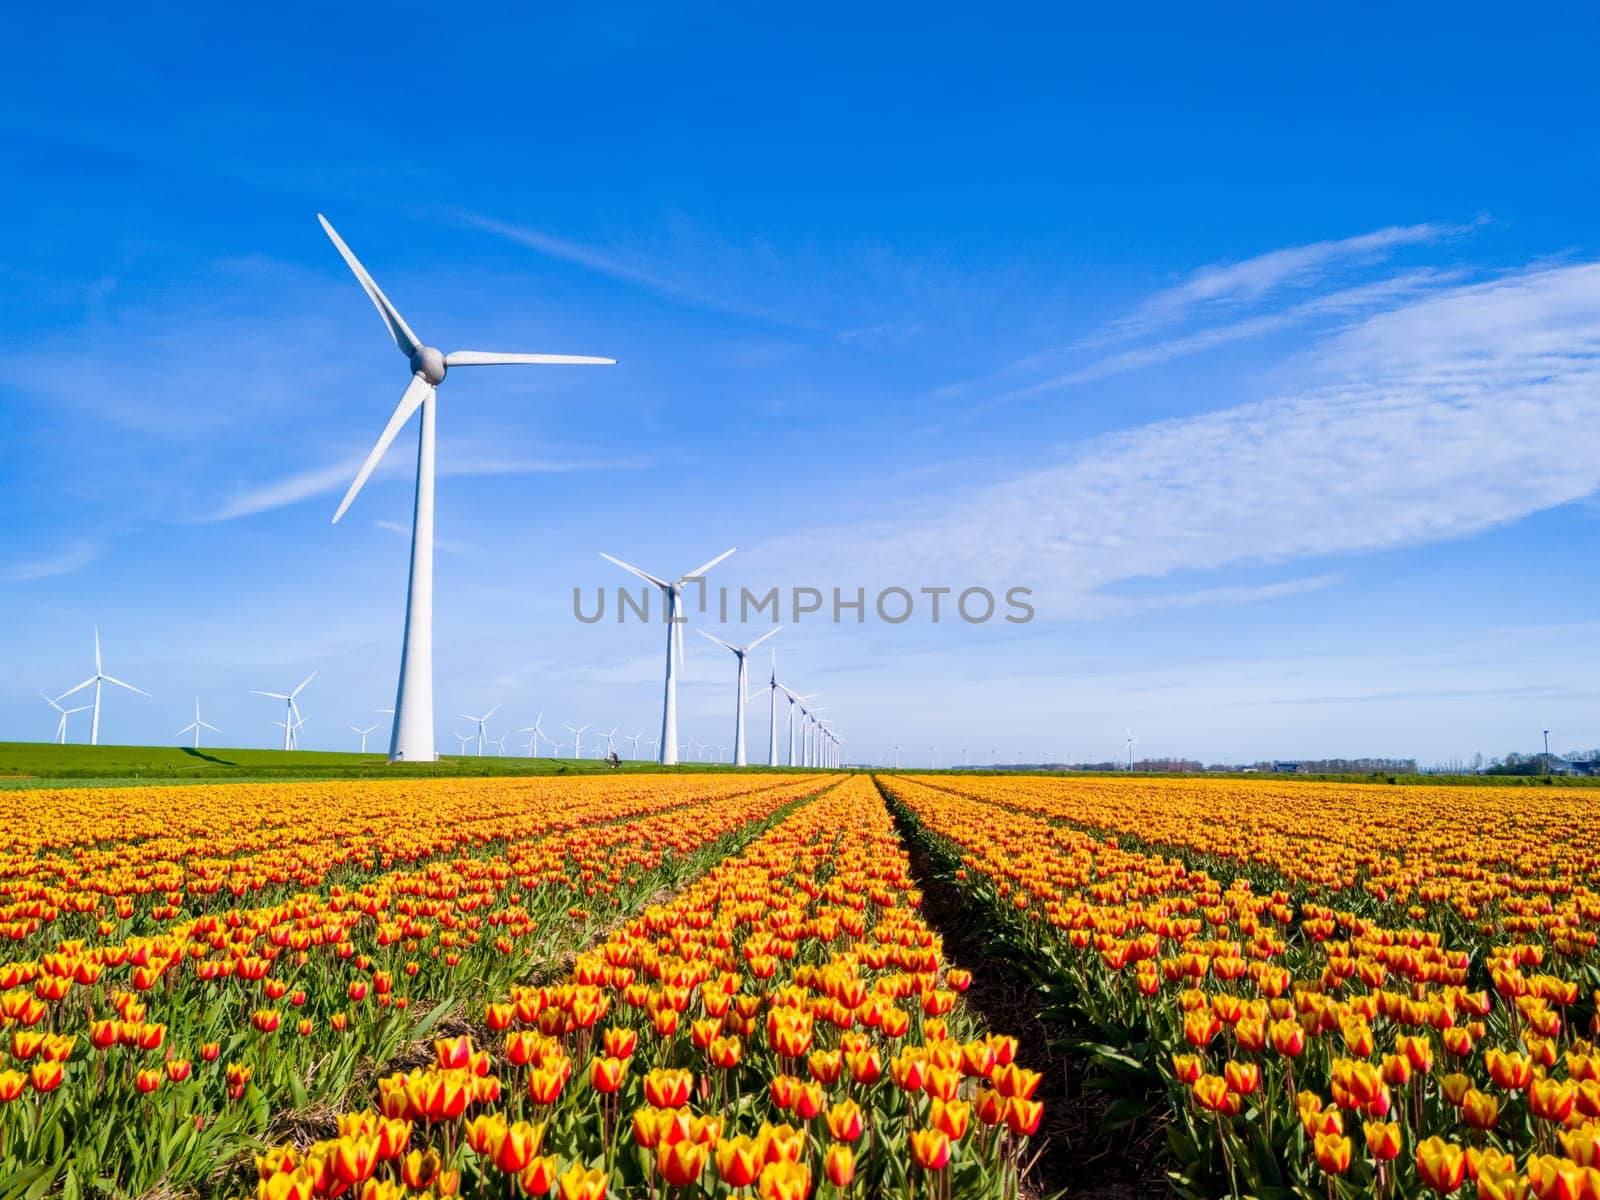 Vibrant tulips dance in a field against a backdrop of windmill turbines in the Netherlands Flevoland by fokkebok